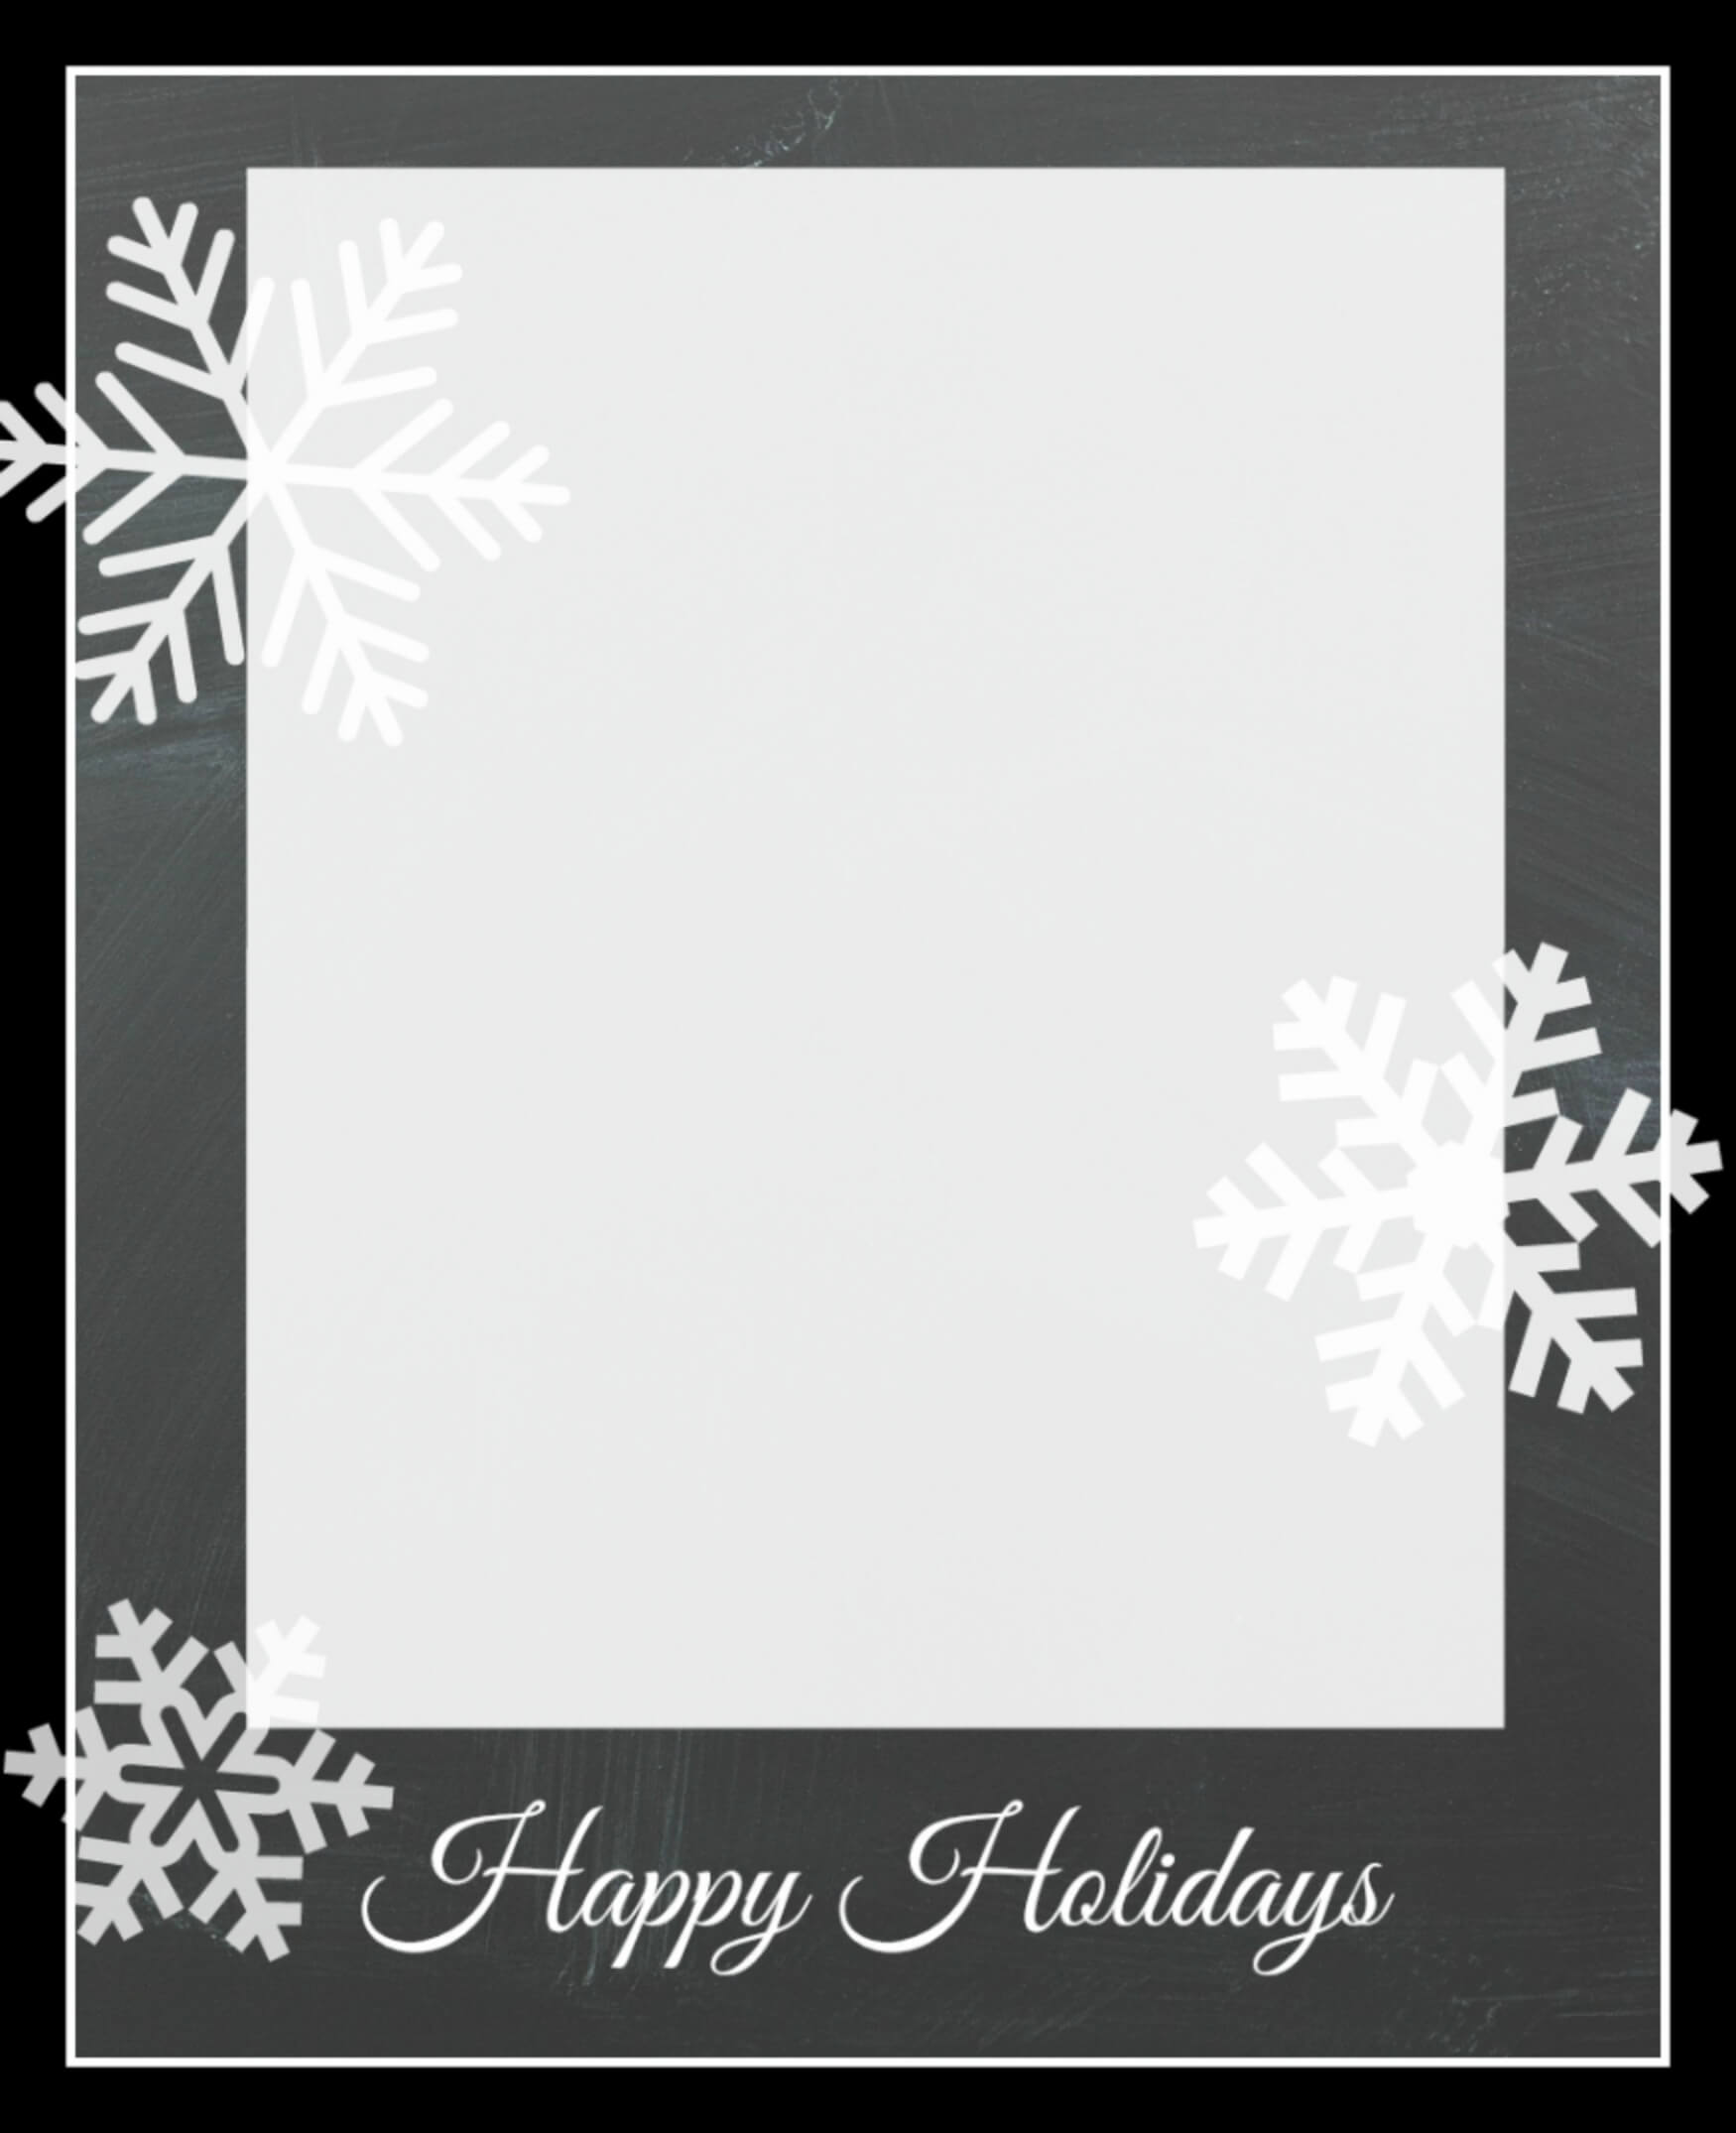 Free Christmas Photo Cards Templates - Dalep.midnightpig.co For Free Holiday Photo Card Templates